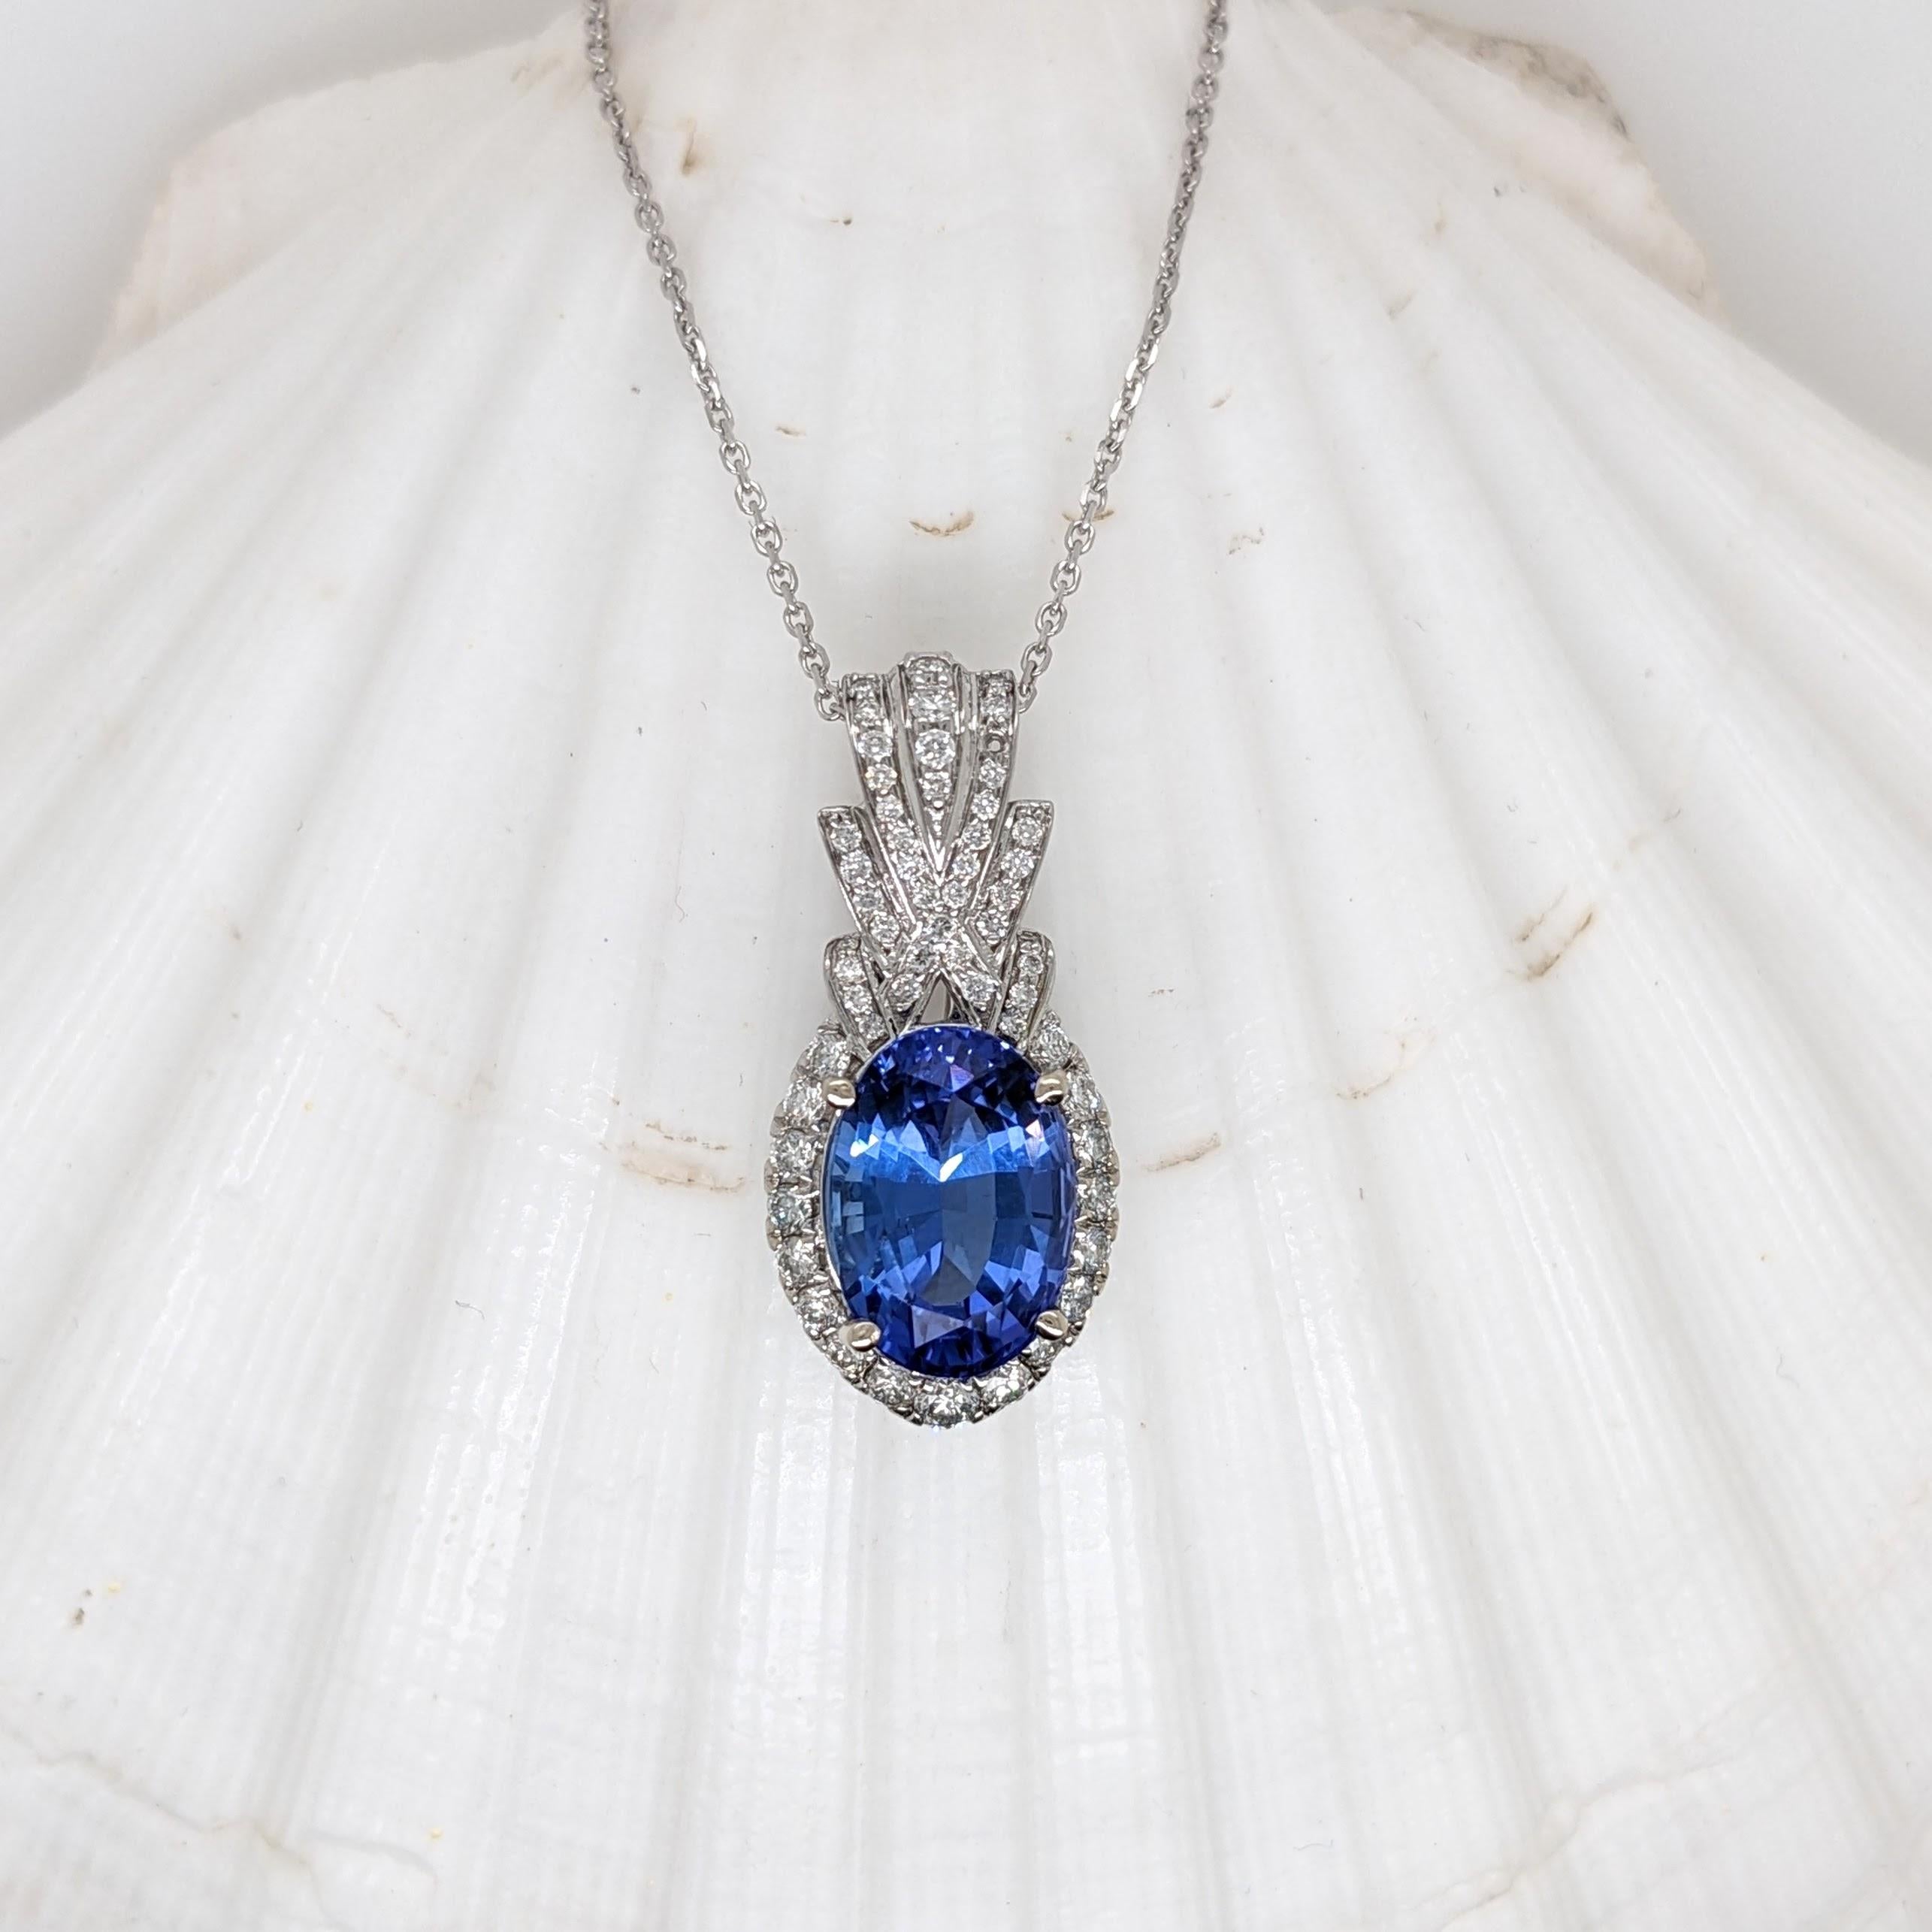 This hand picked tanzanite is absolutely gorgeous with a rich blue color and beautiful clean oval cut. We set it in a new NNJ pendant design (that reminds us a little of a pineapple!) made in 14k solid white gold and studded with all natural